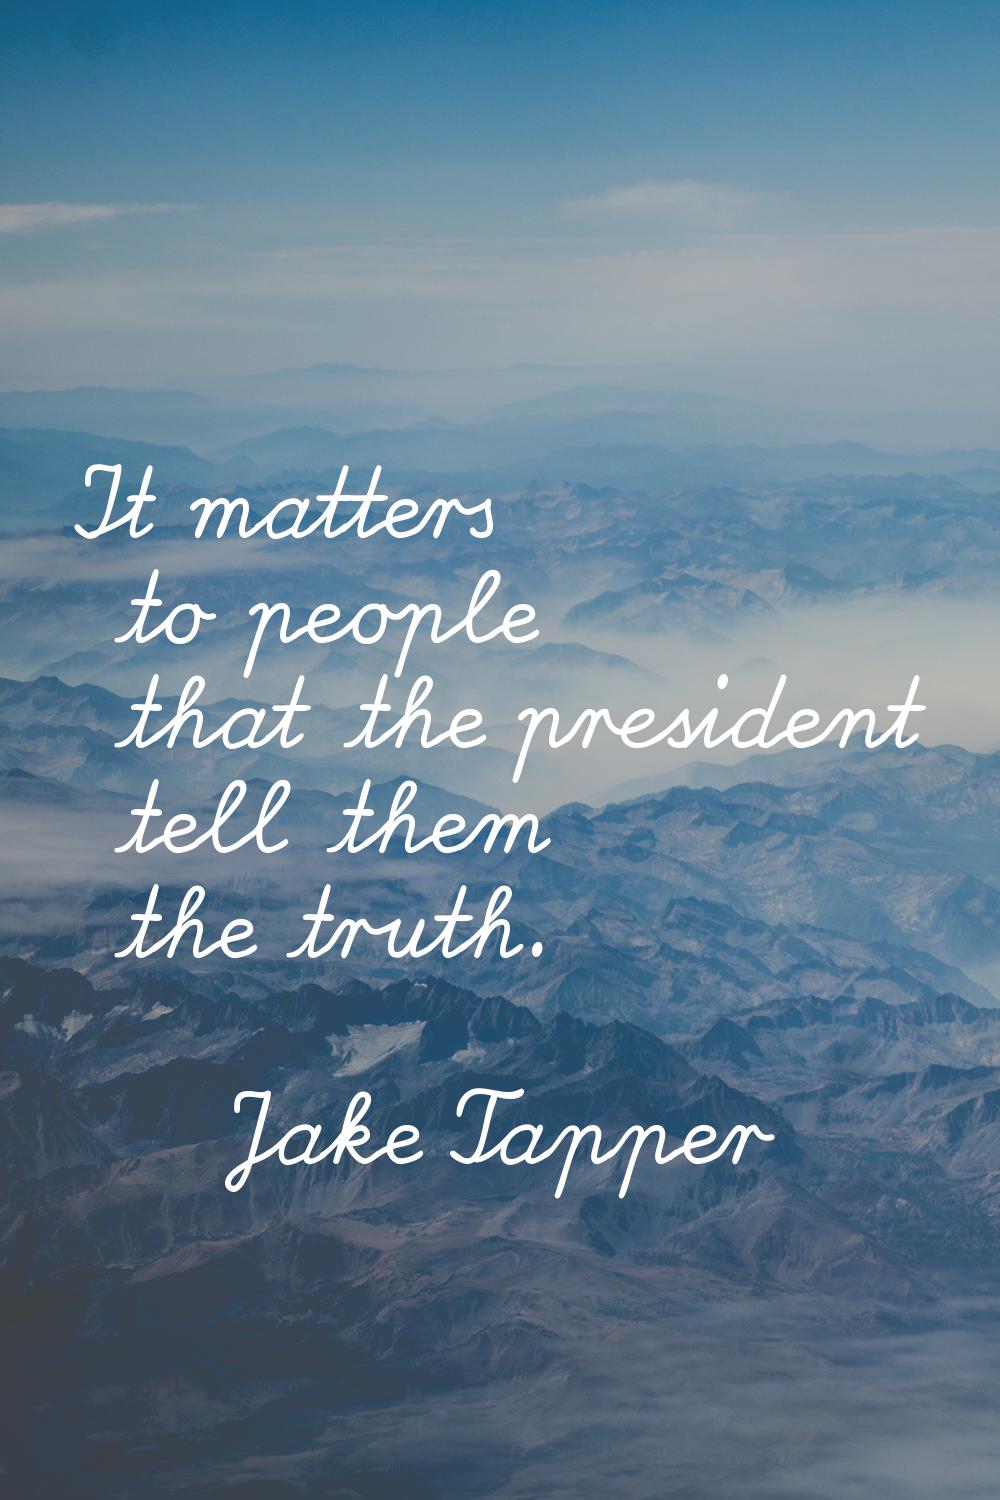 It matters to people that the president tell them the truth.